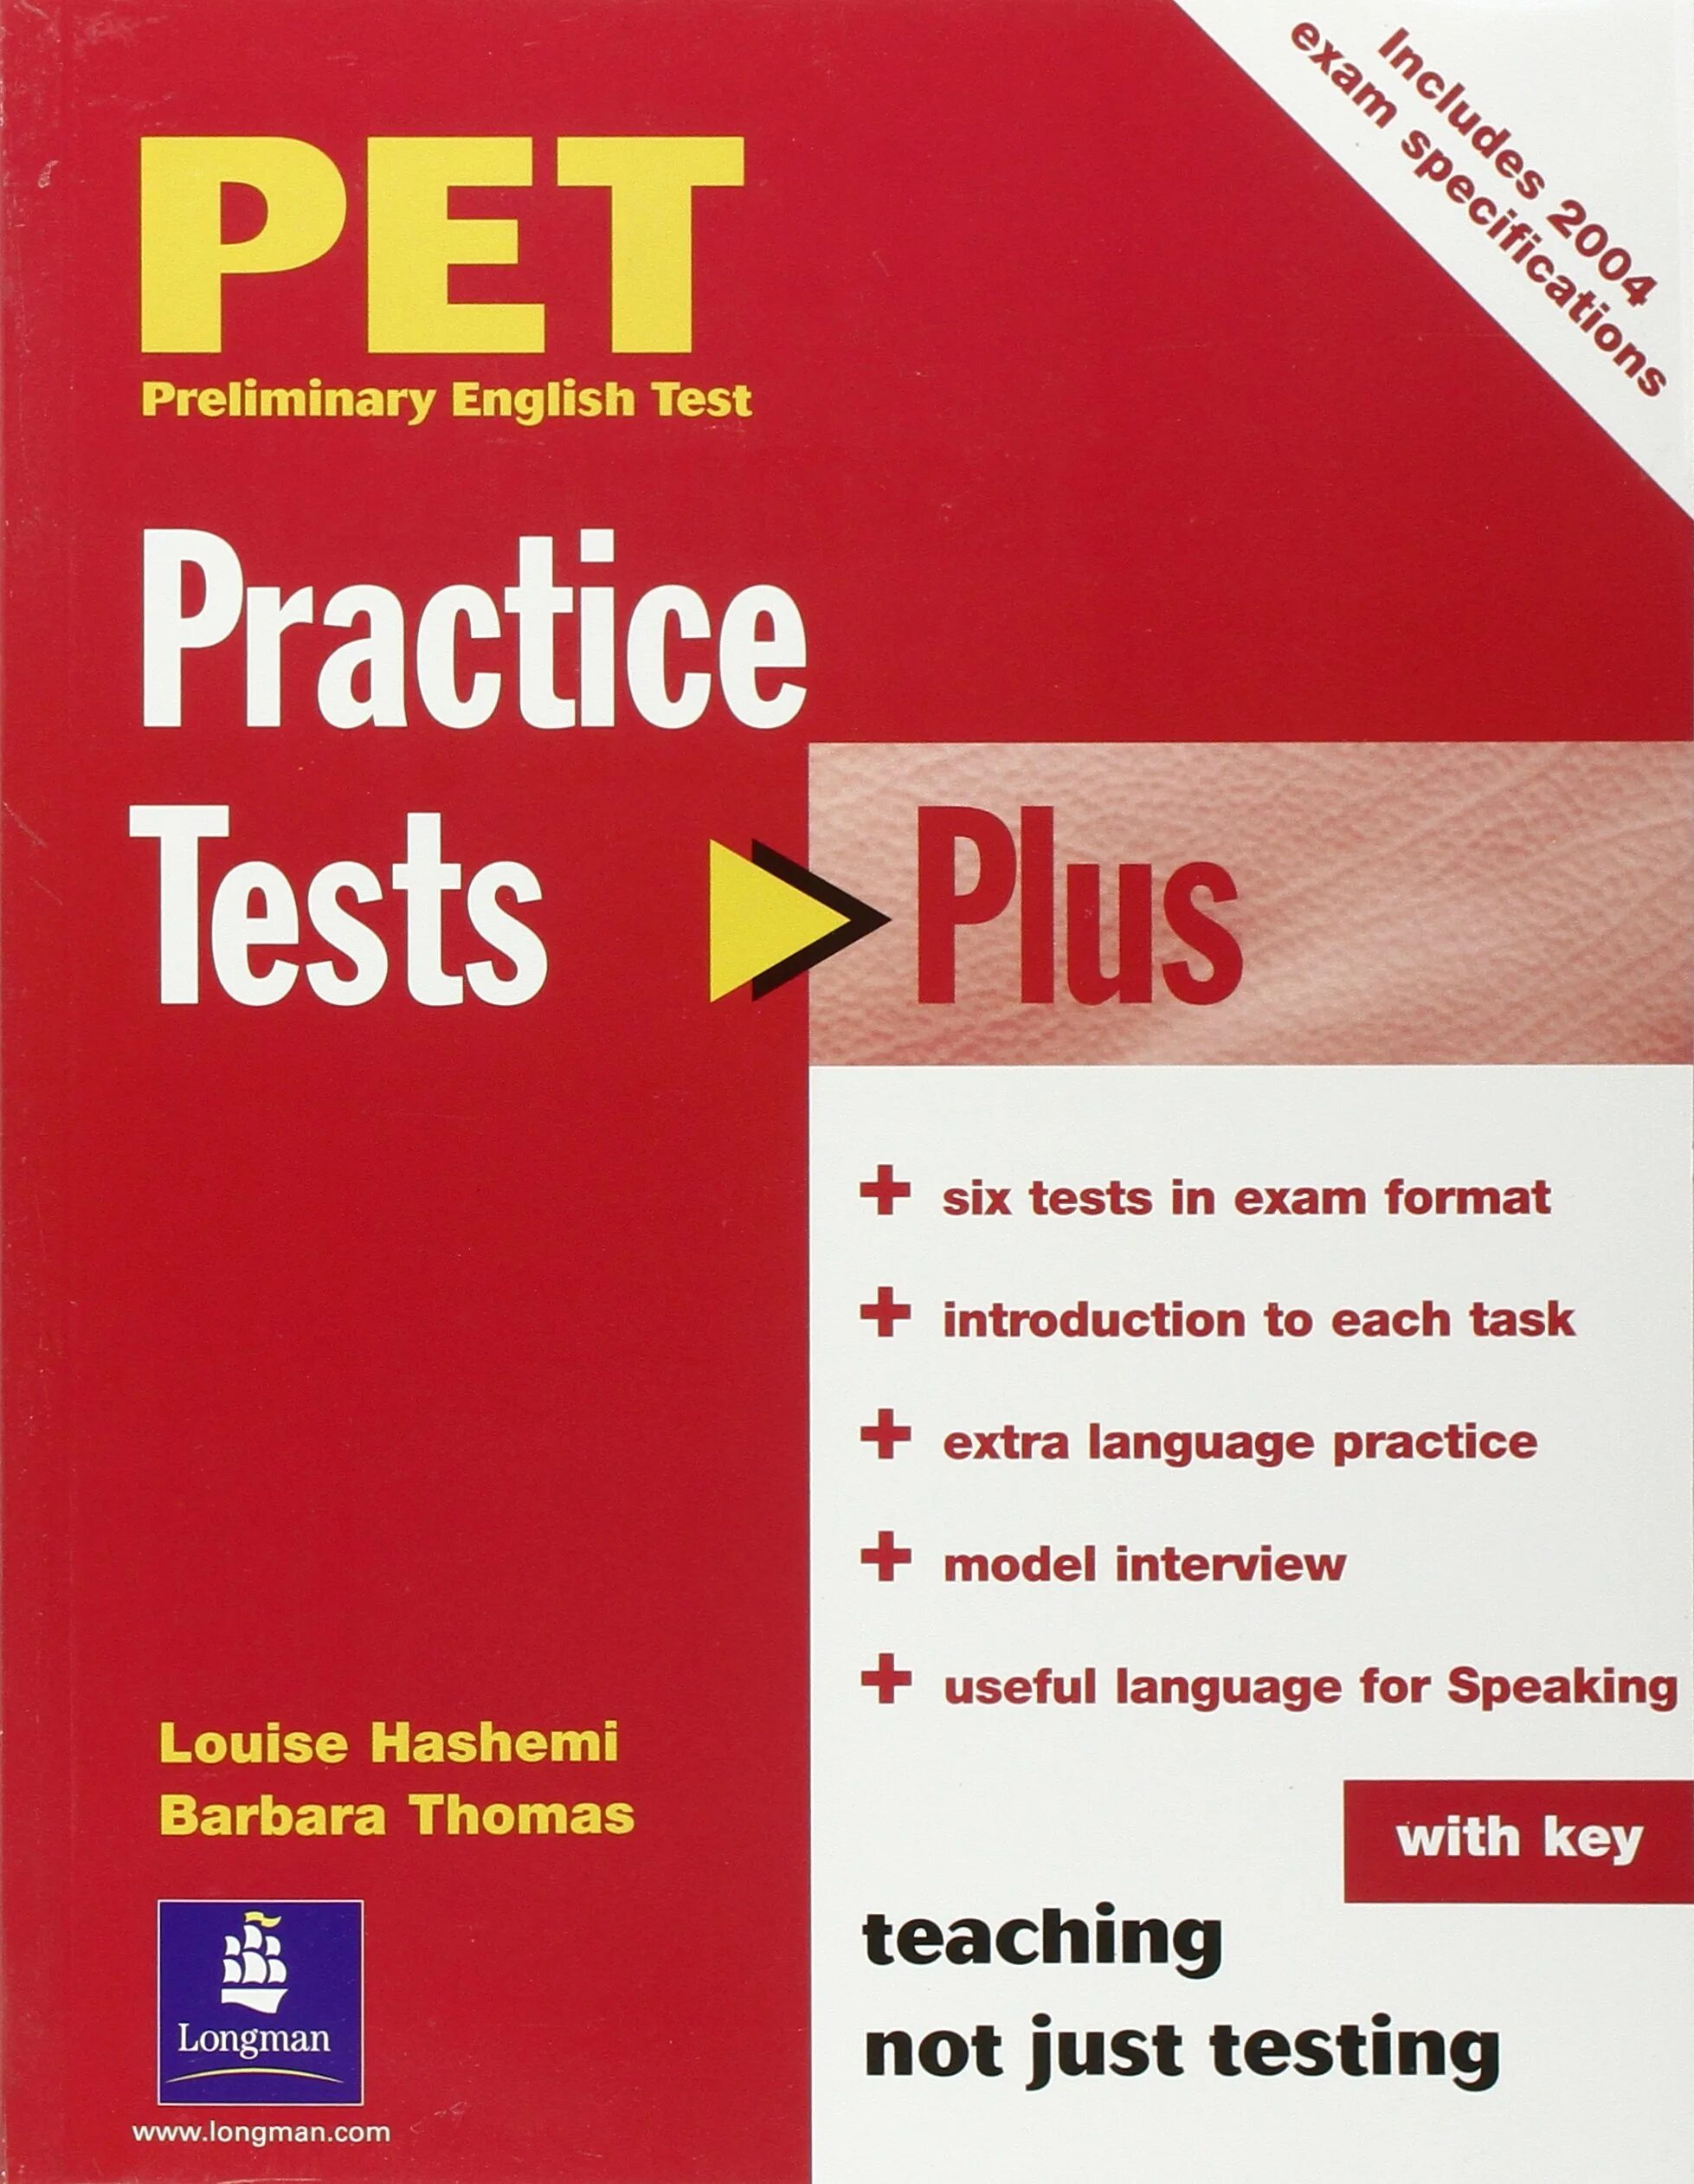 IELTS Practice Tests Plus 2. Preliminary English Test 6. Pearson Education Ltd 2012. Practice Tests for Pet 2020: teacher's book. Preliminary english test